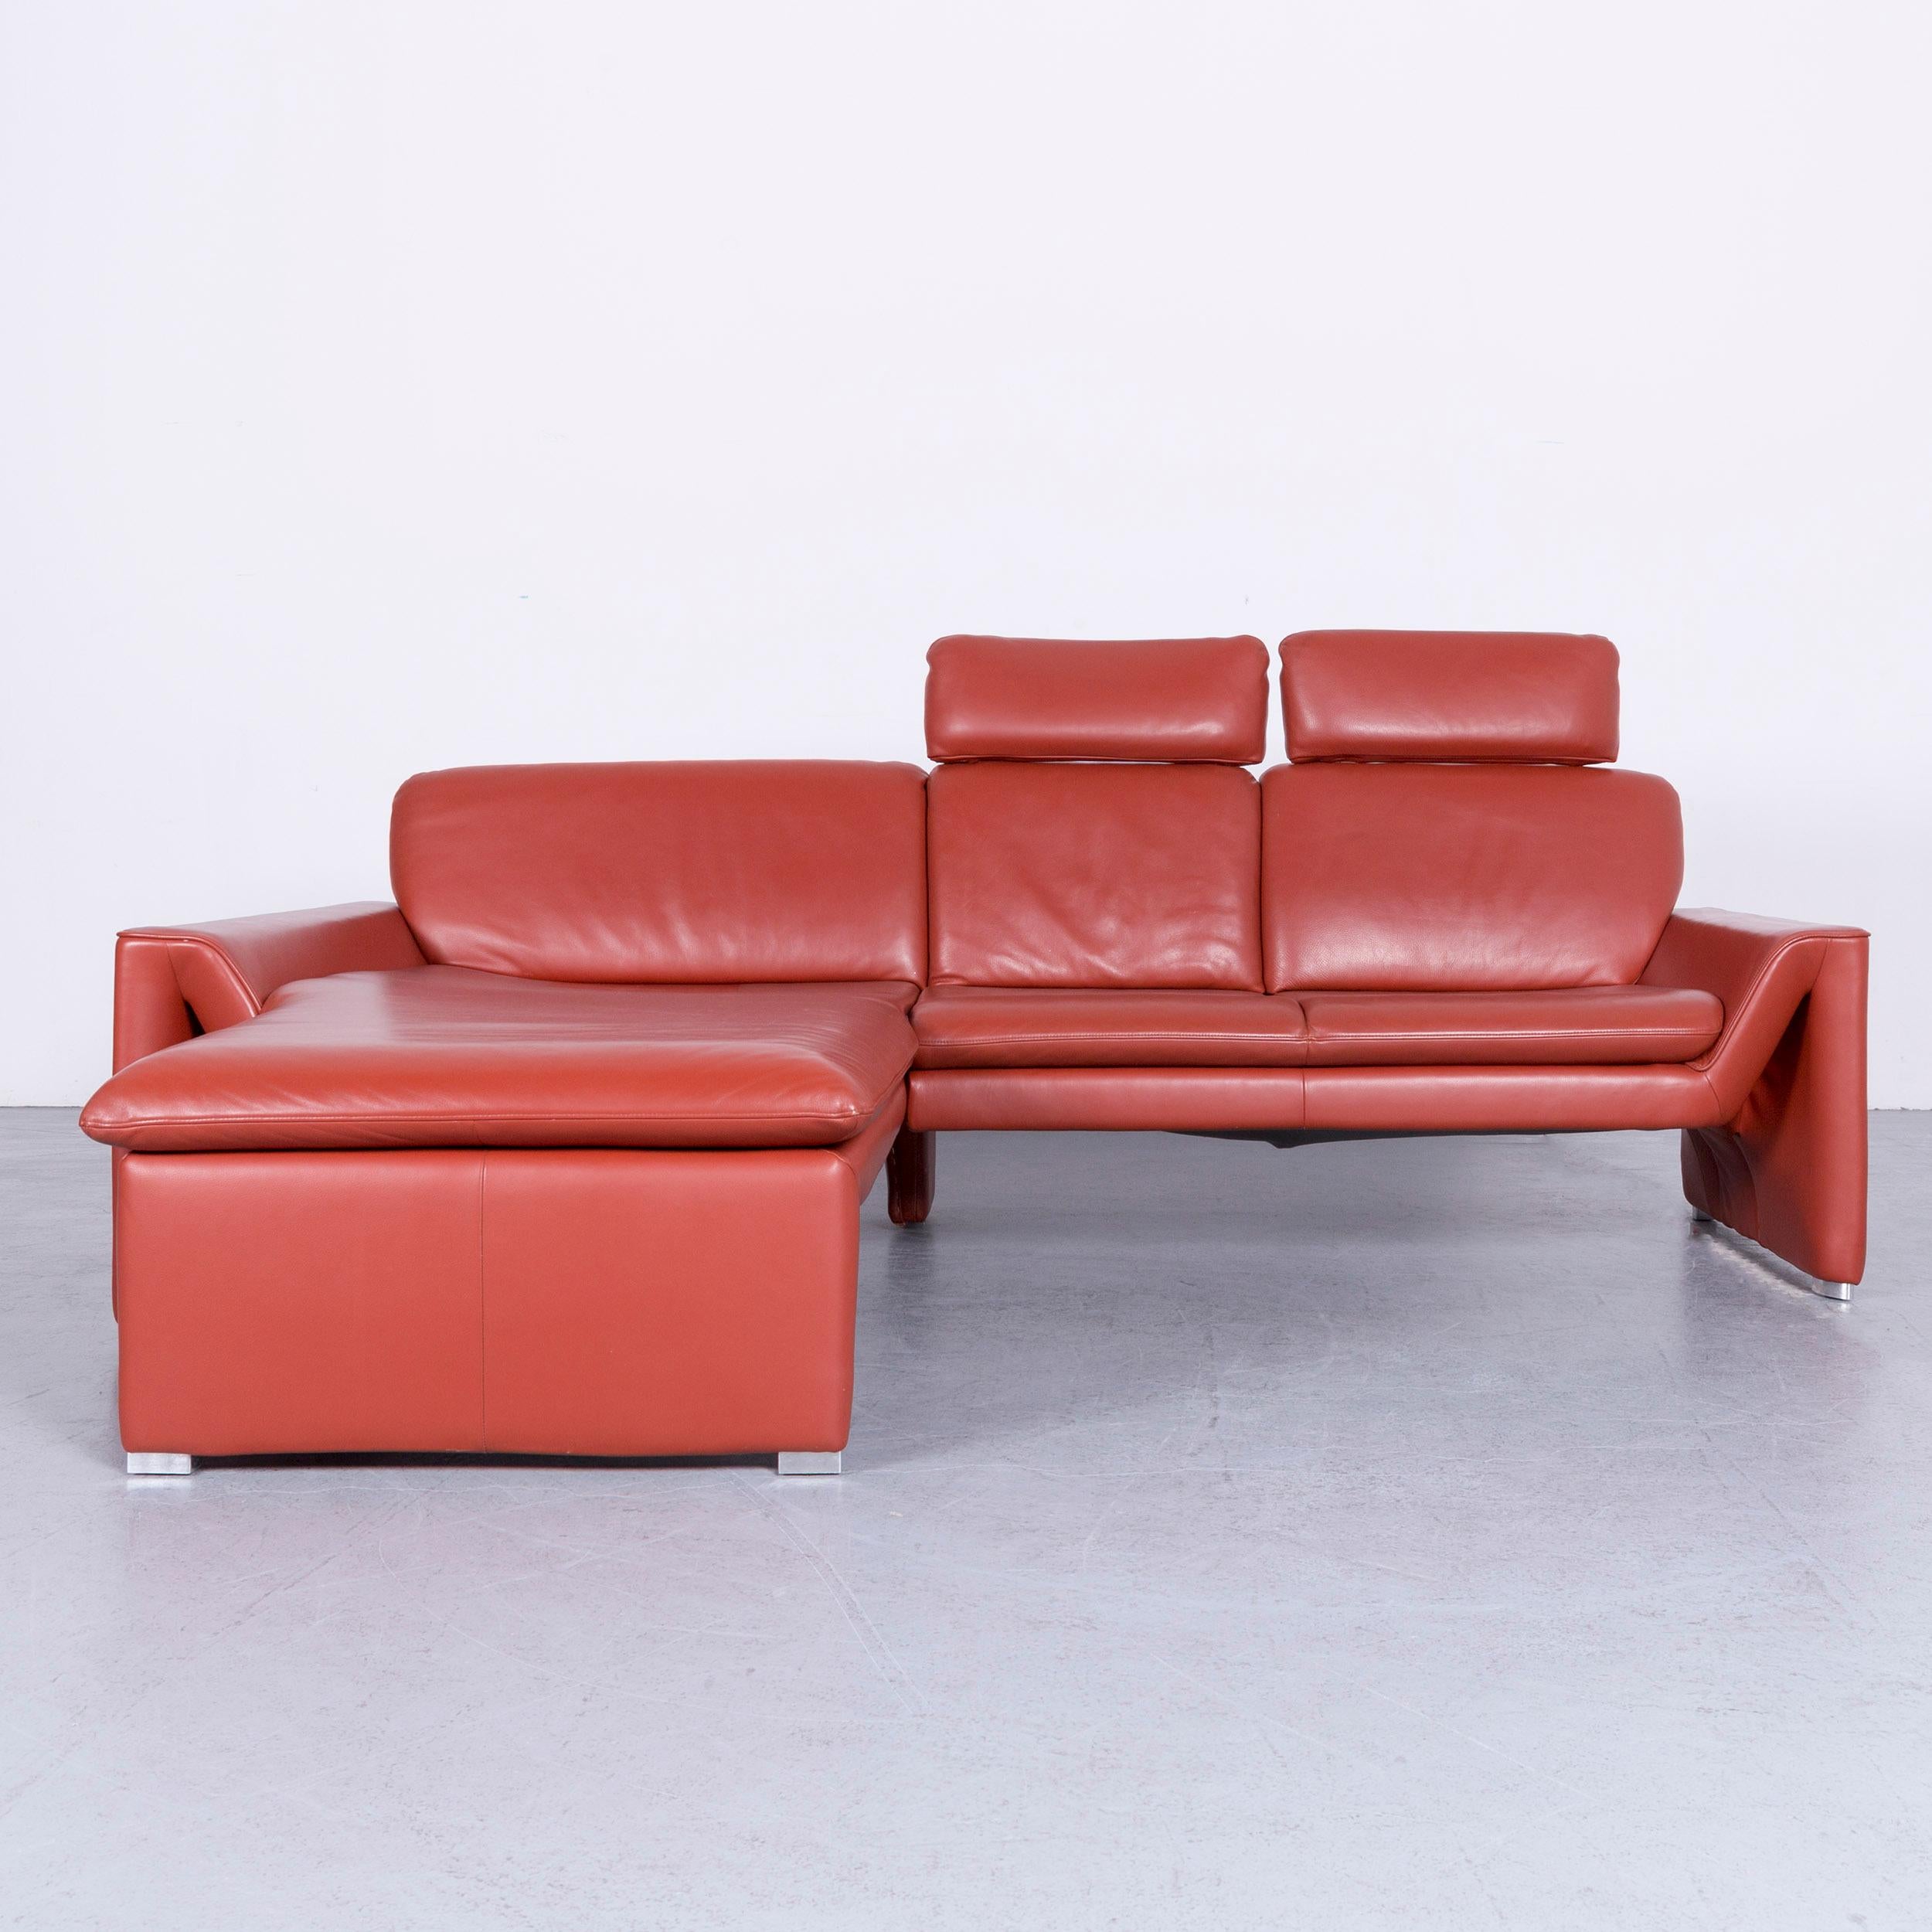 We bring to you a Laauser Corvus designer corner-sofa leather red three-seat couch modern.